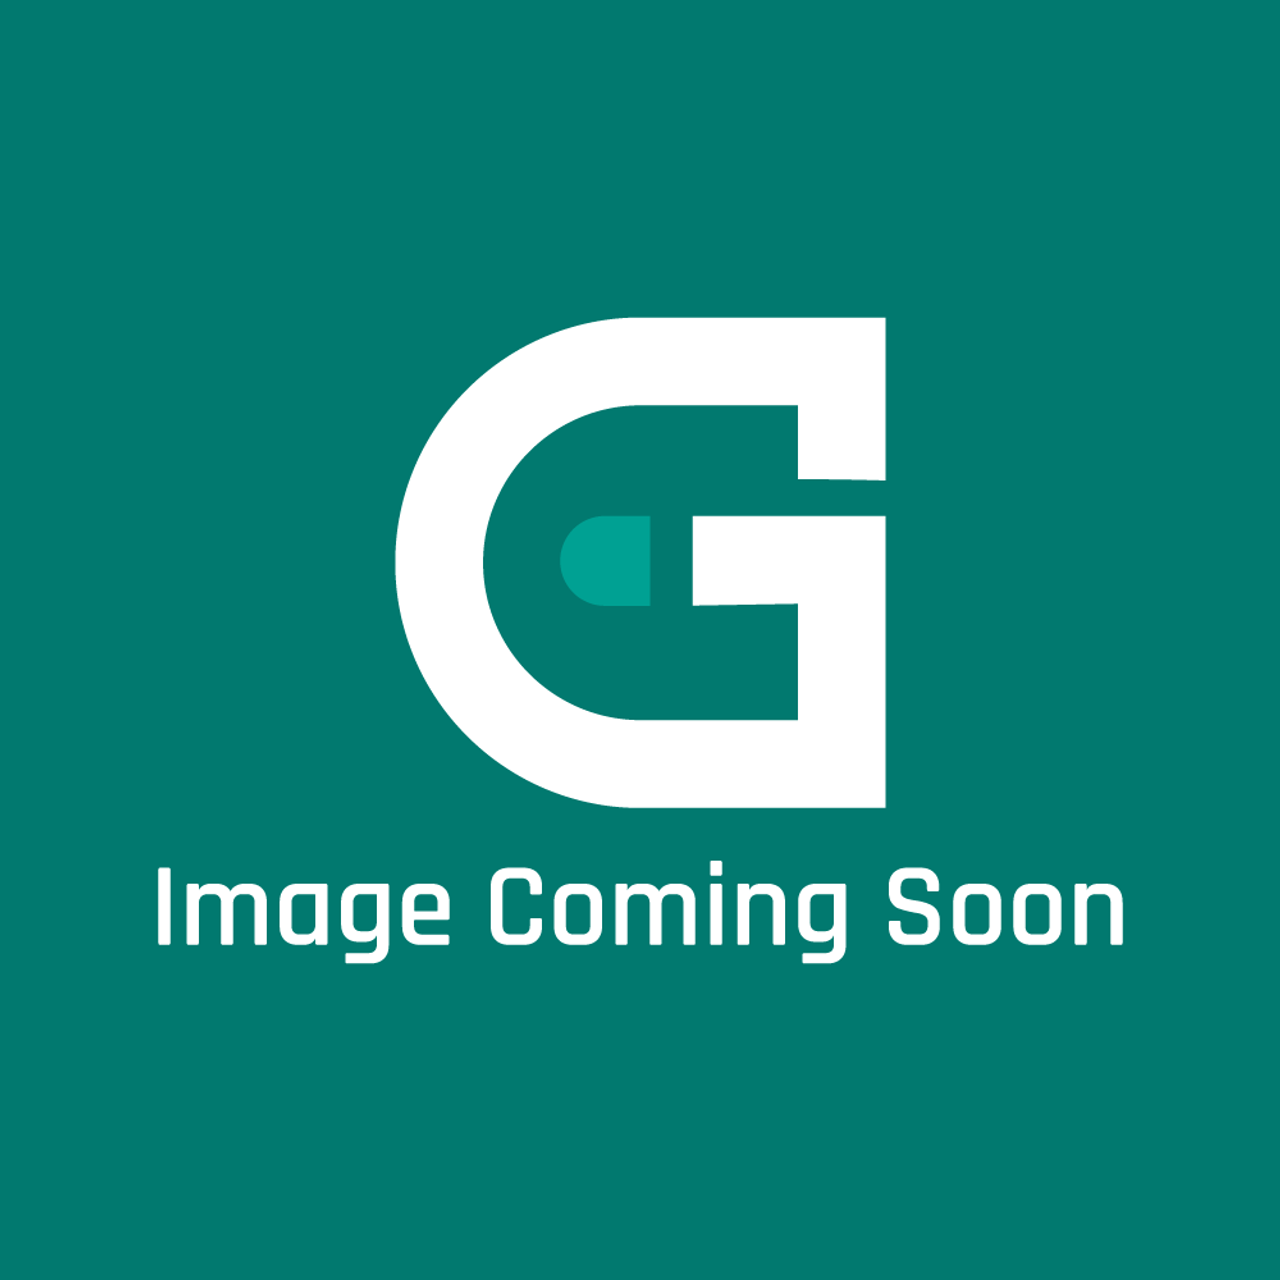 AGA Marvel AE4M260223 - Domed Stud Ms Blk P032419 - Image Coming Soon!